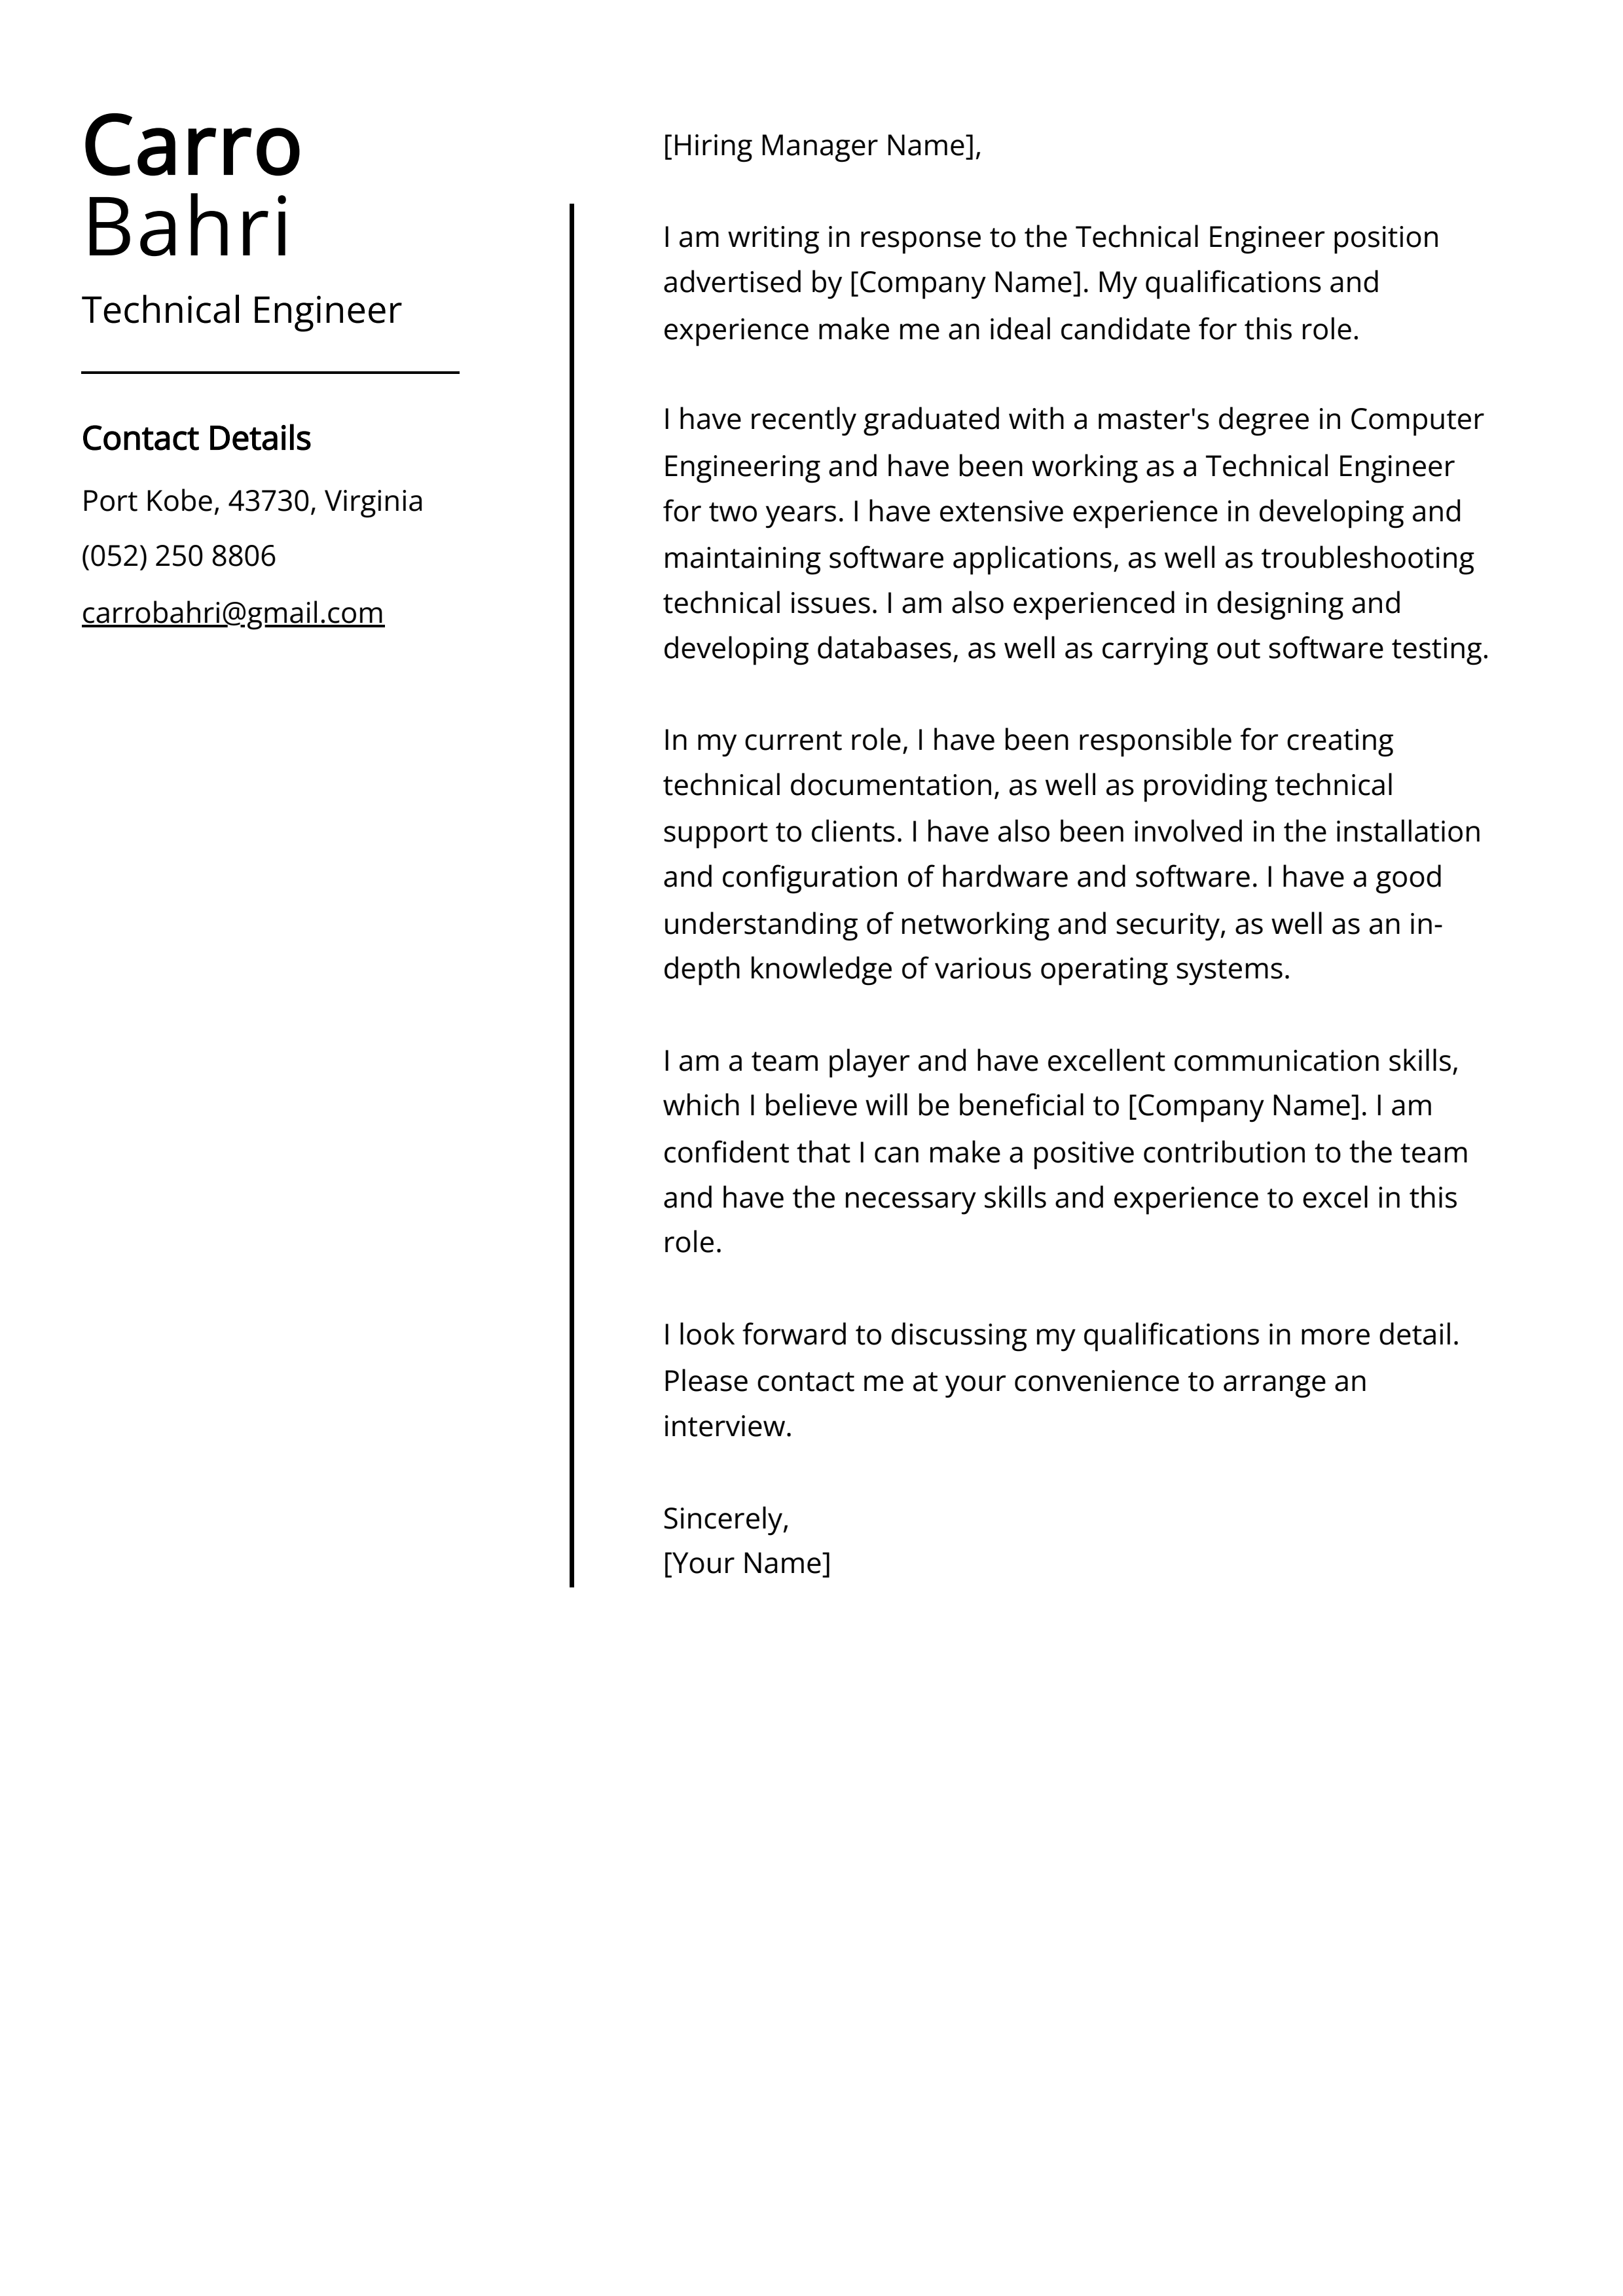 Technical Engineer Cover Letter Example